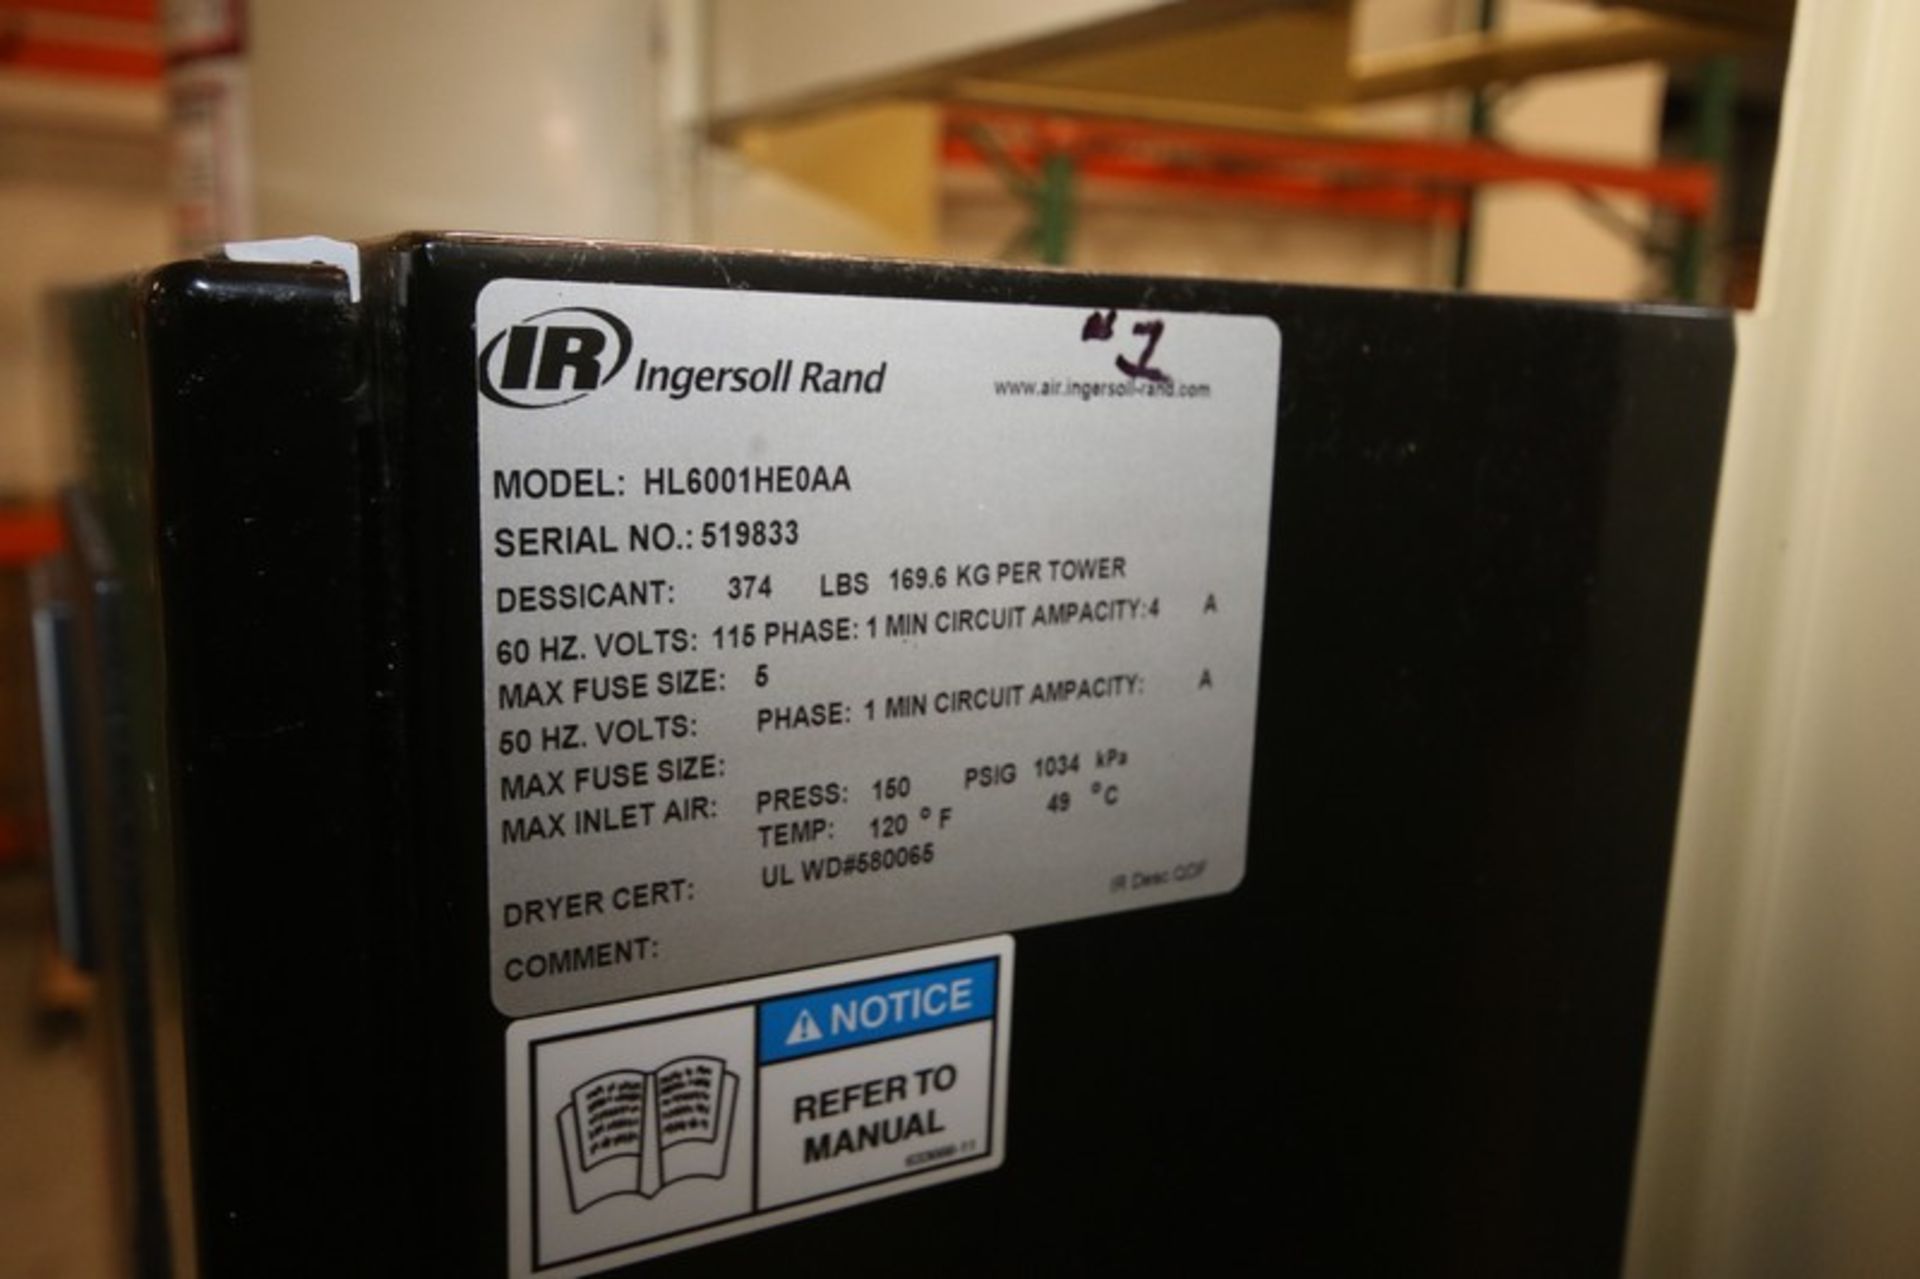 2011 Ingersol Rand Desiccant Air Dryer, Model HL6001HE0AA, SN 519833, 150 PSIG, Single Phase with - Image 4 of 4